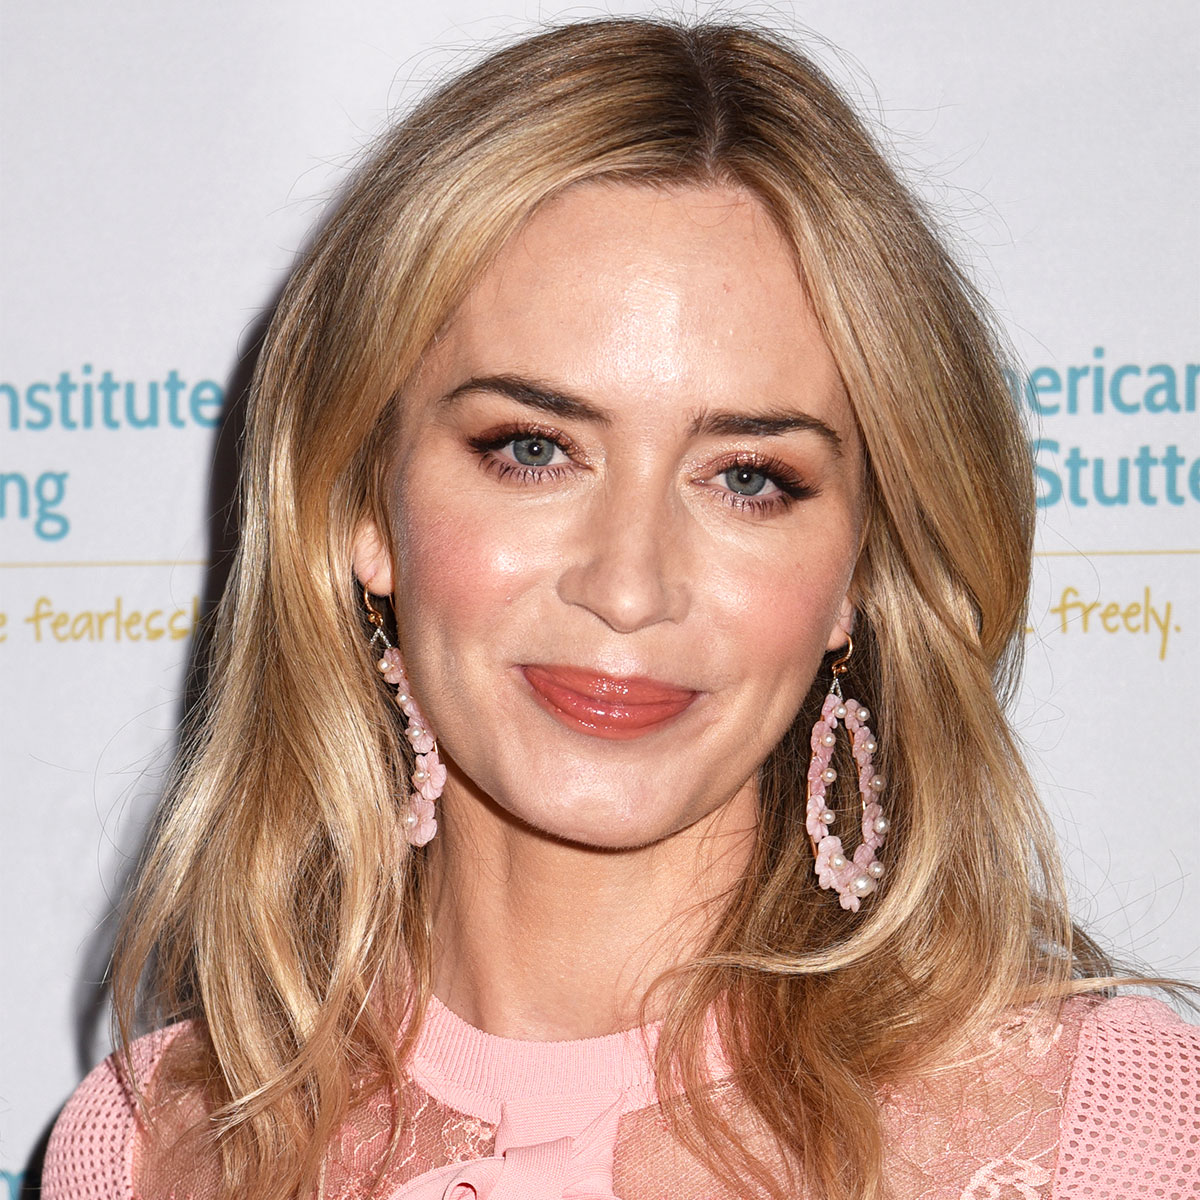 Emily Blunt Is A Vision In White As She Steps Out In A Bandeau Top And Pantsuit Following Her